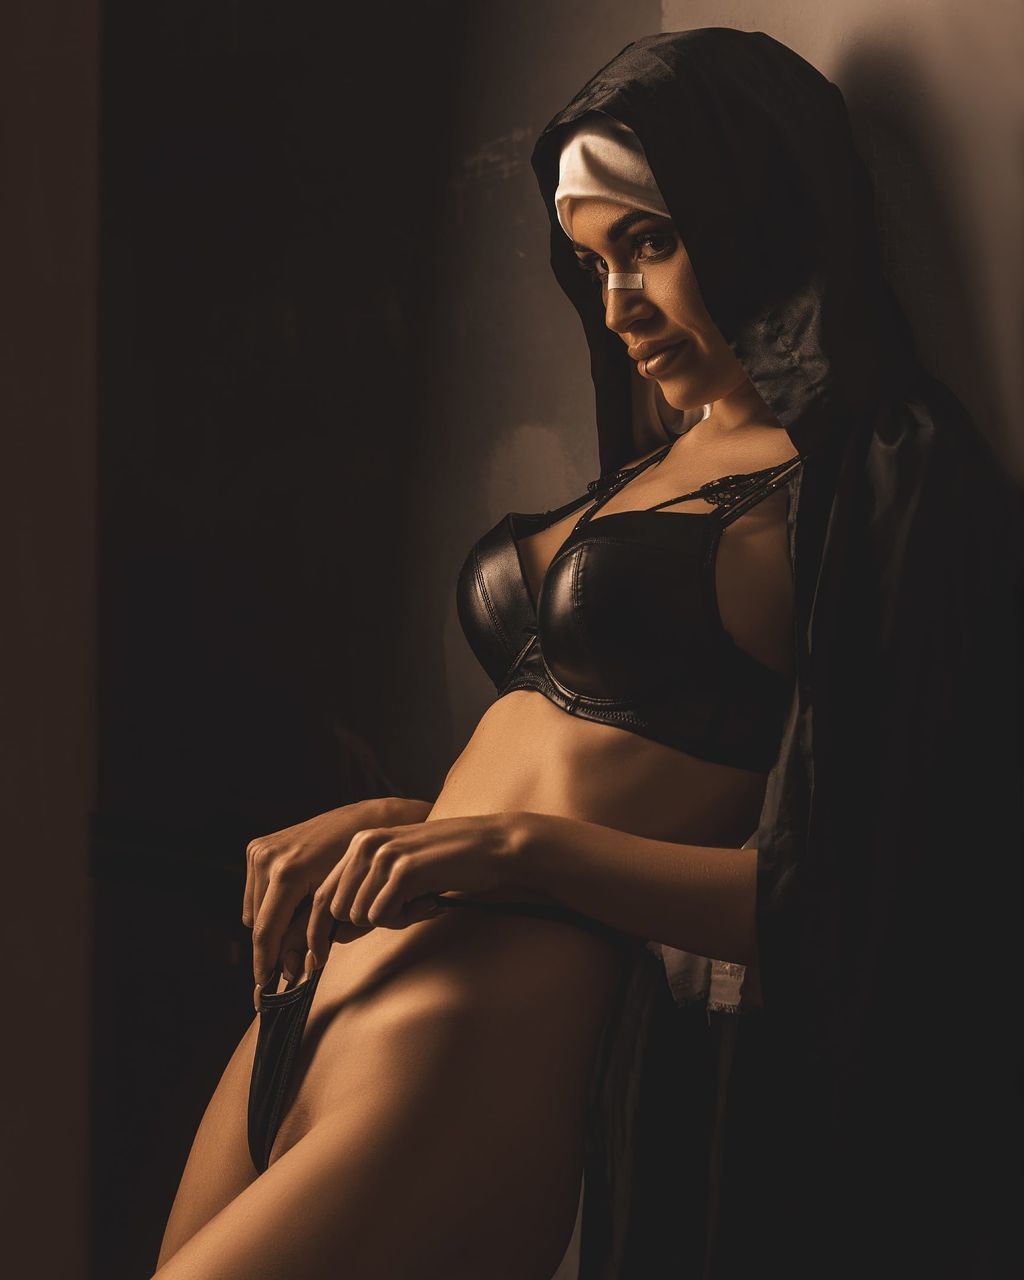 adult, women, one person, clothing, young adult, female, fashion, darkness, indoors, lifestyles, portrait, underwear, hairstyle, copy space, black, lingerie, dark, long hair, desire, photo shoot, looking, elegance, sitting, studio shot